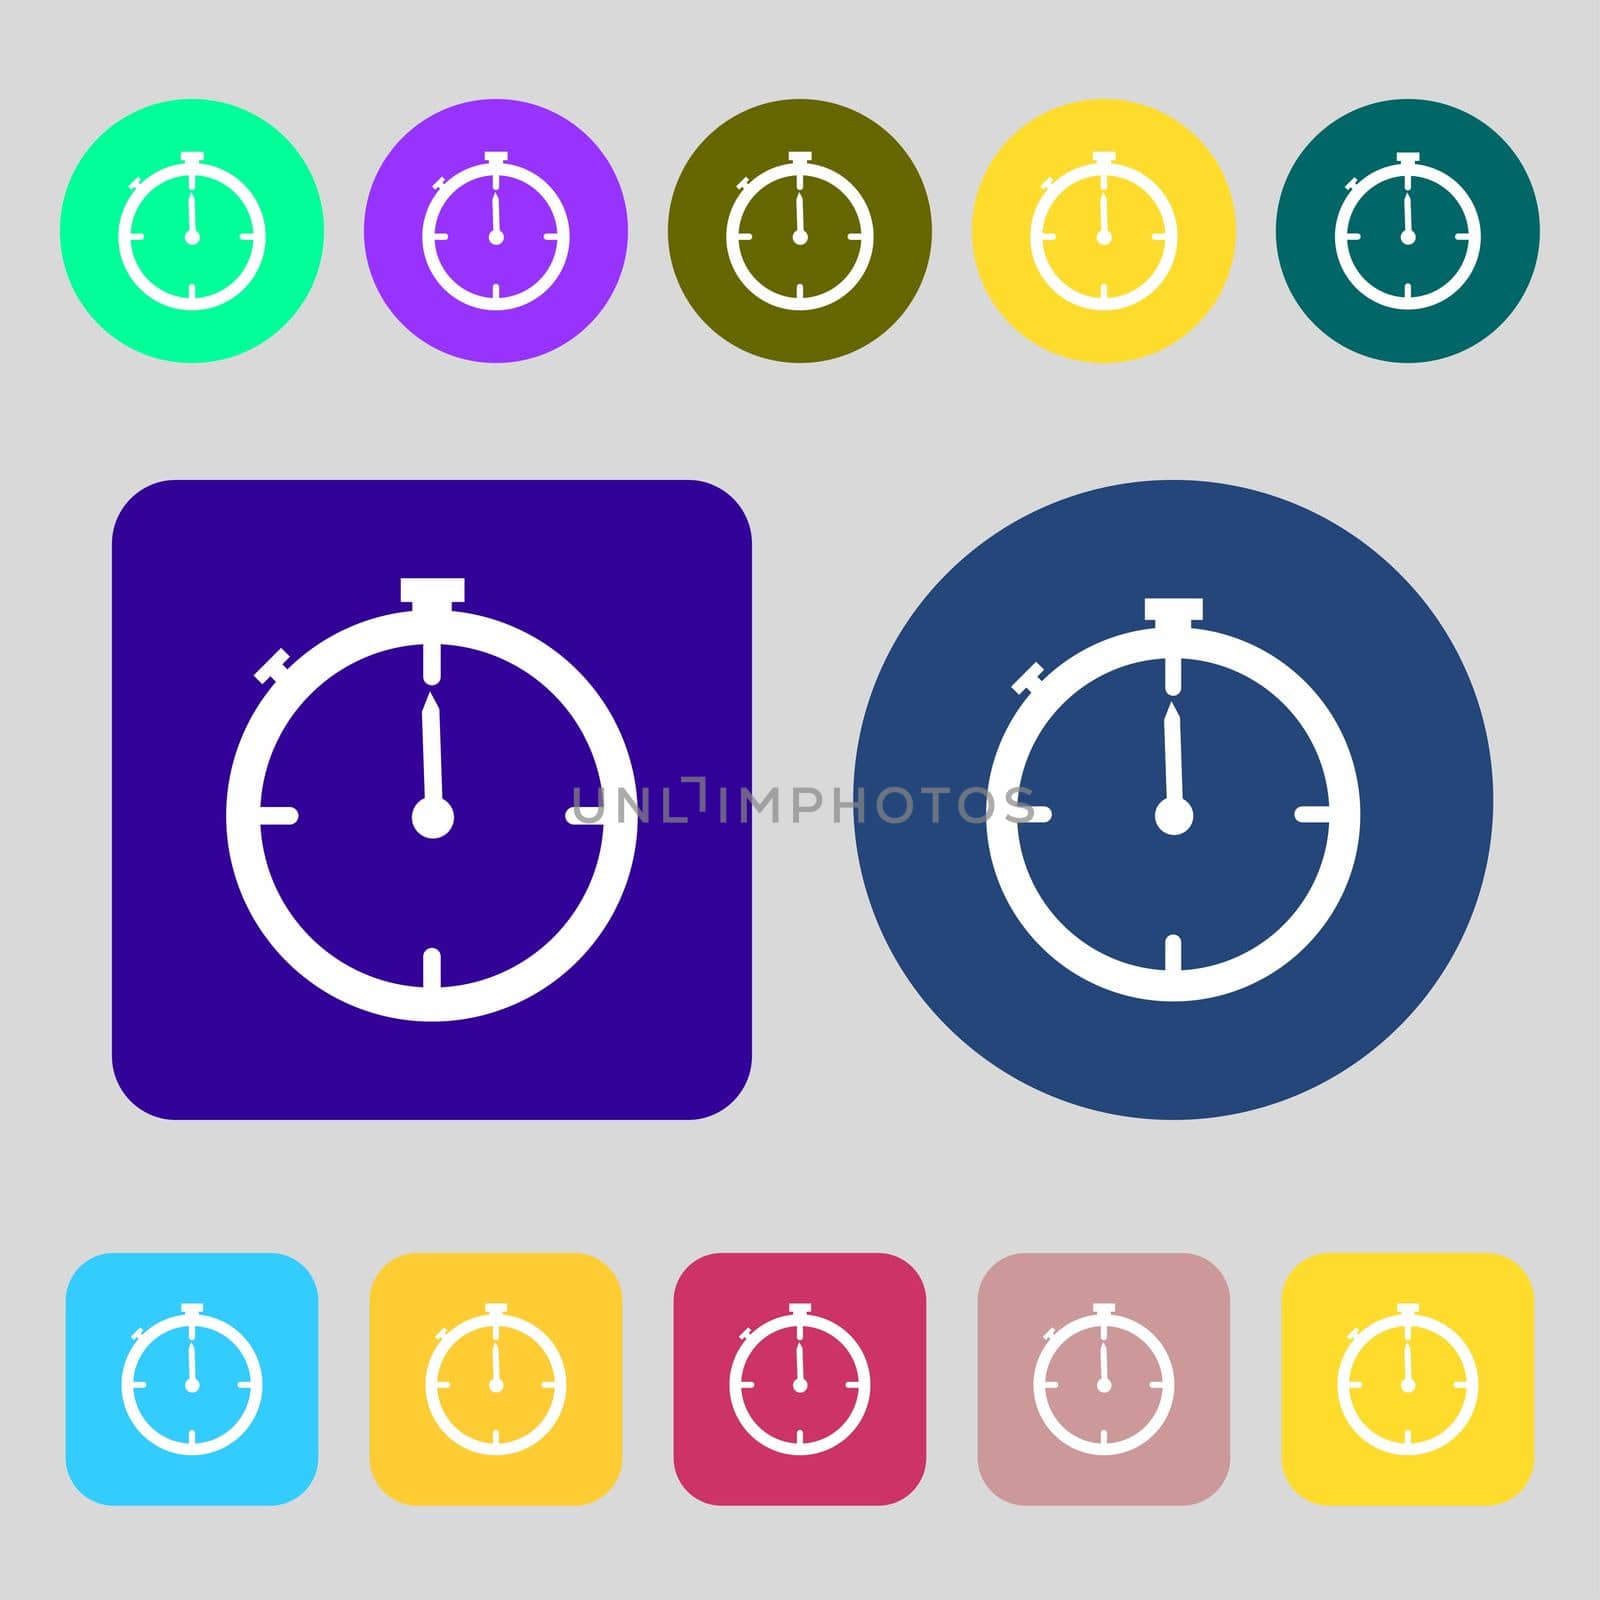 Timer sign icon. Stopwatch symbol. 12 colored buttons. Flat design.  by serhii_lohvyniuk